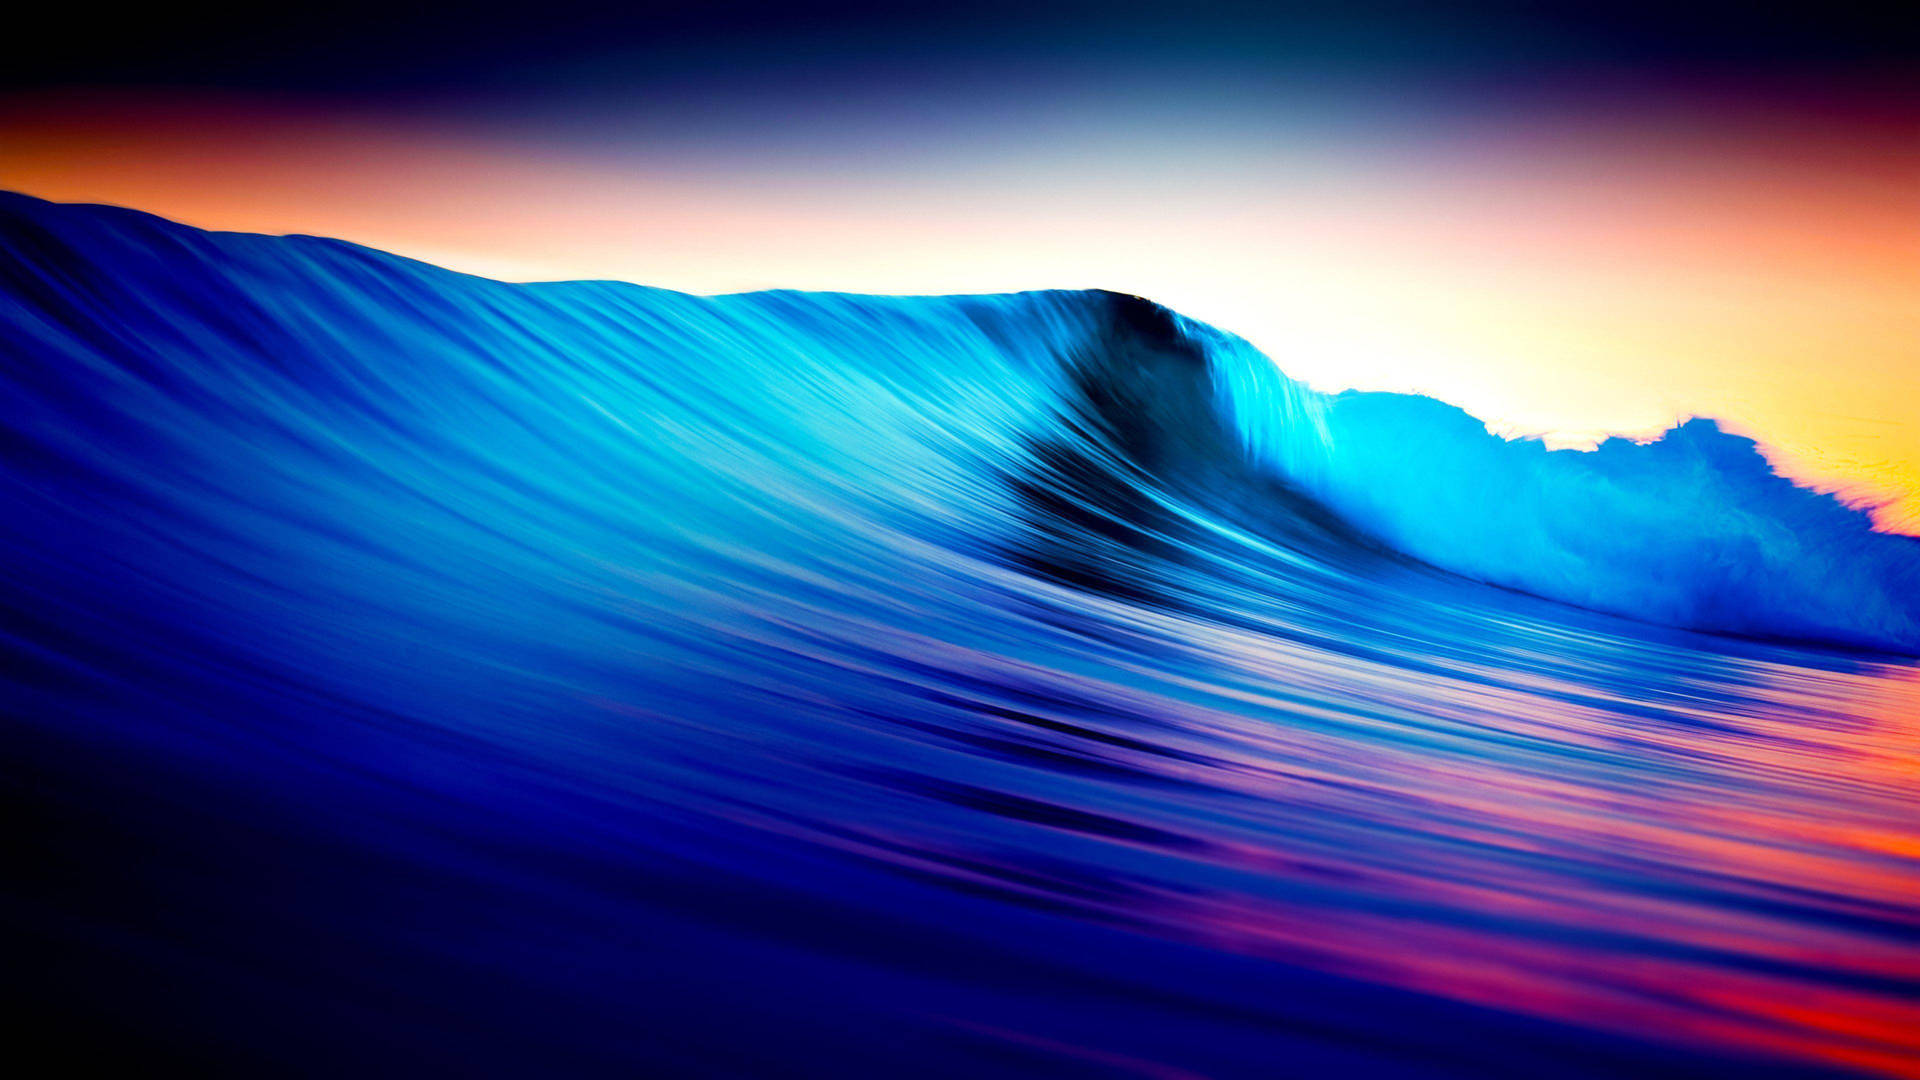 Soothing Aesthetic Waves in 4K Resolution Wallpaper